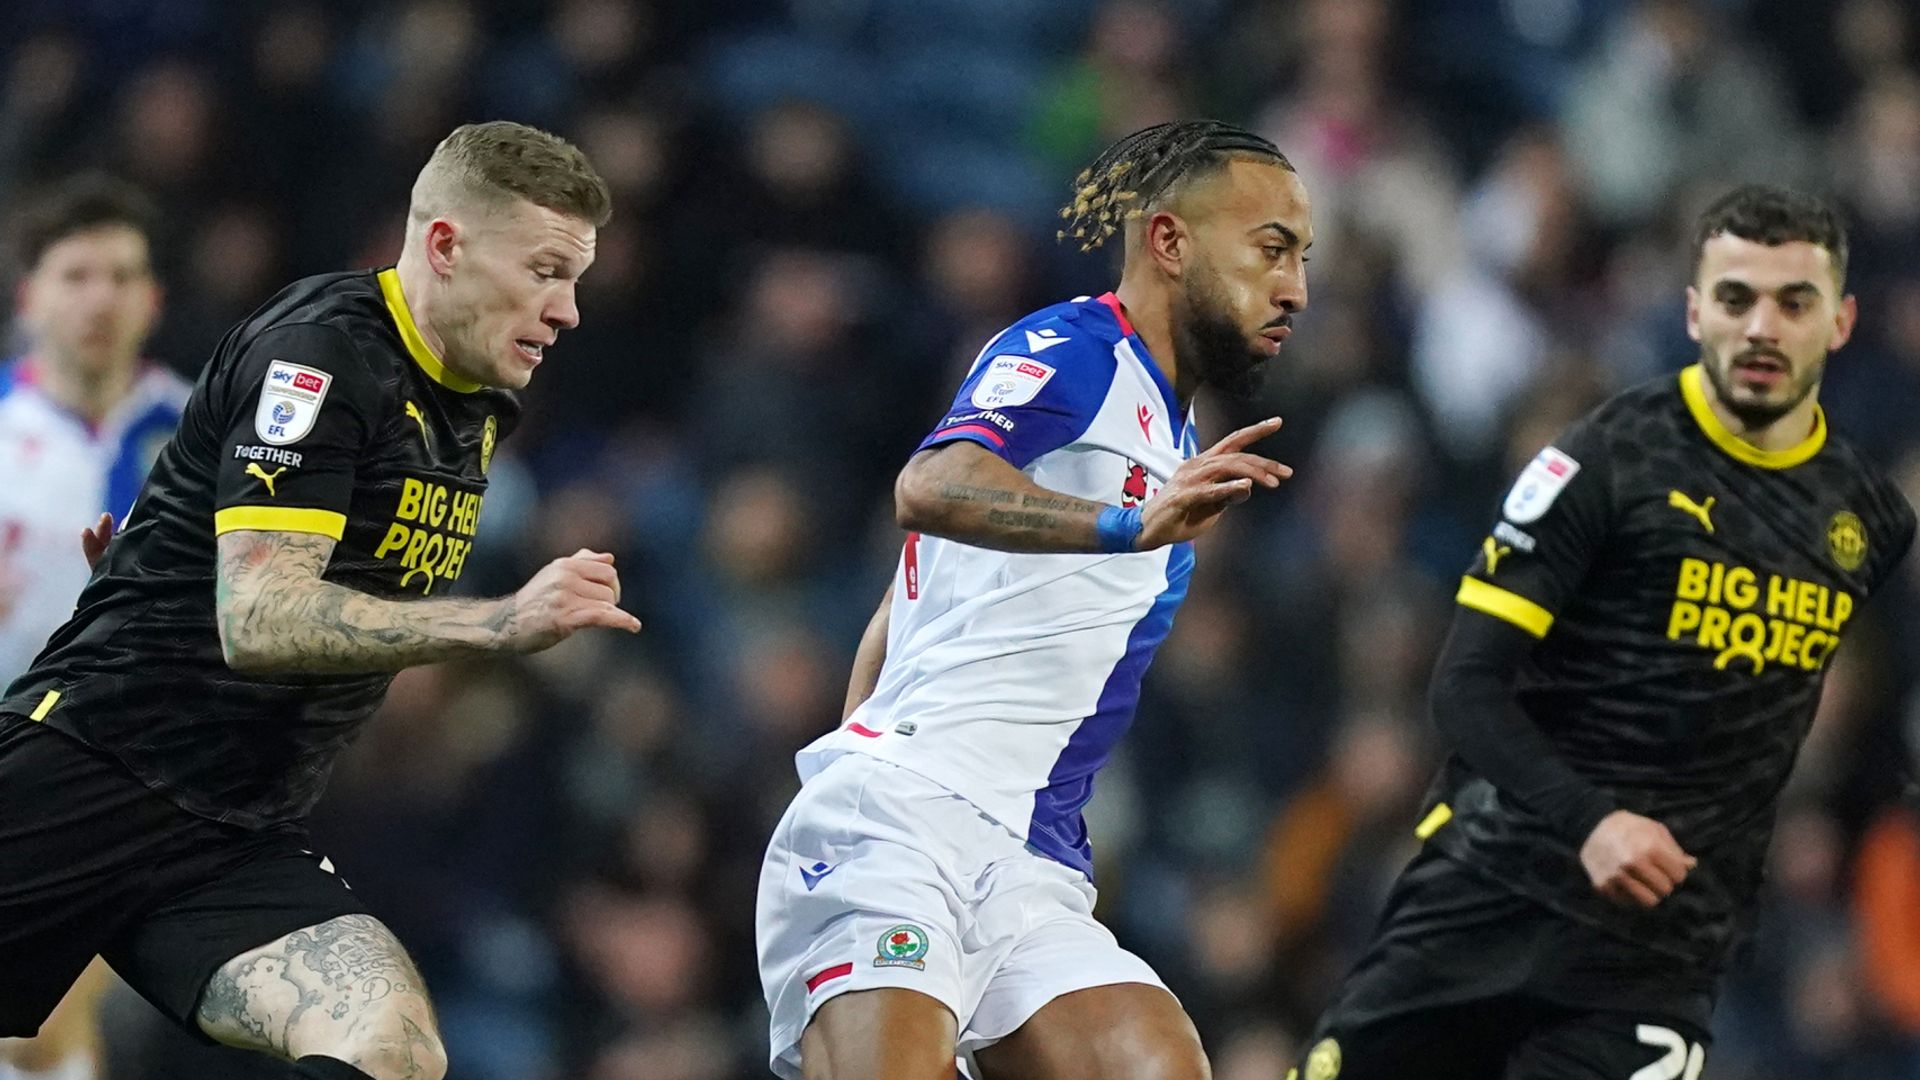 Maloney earns draw in first Wigan game at Blackburn